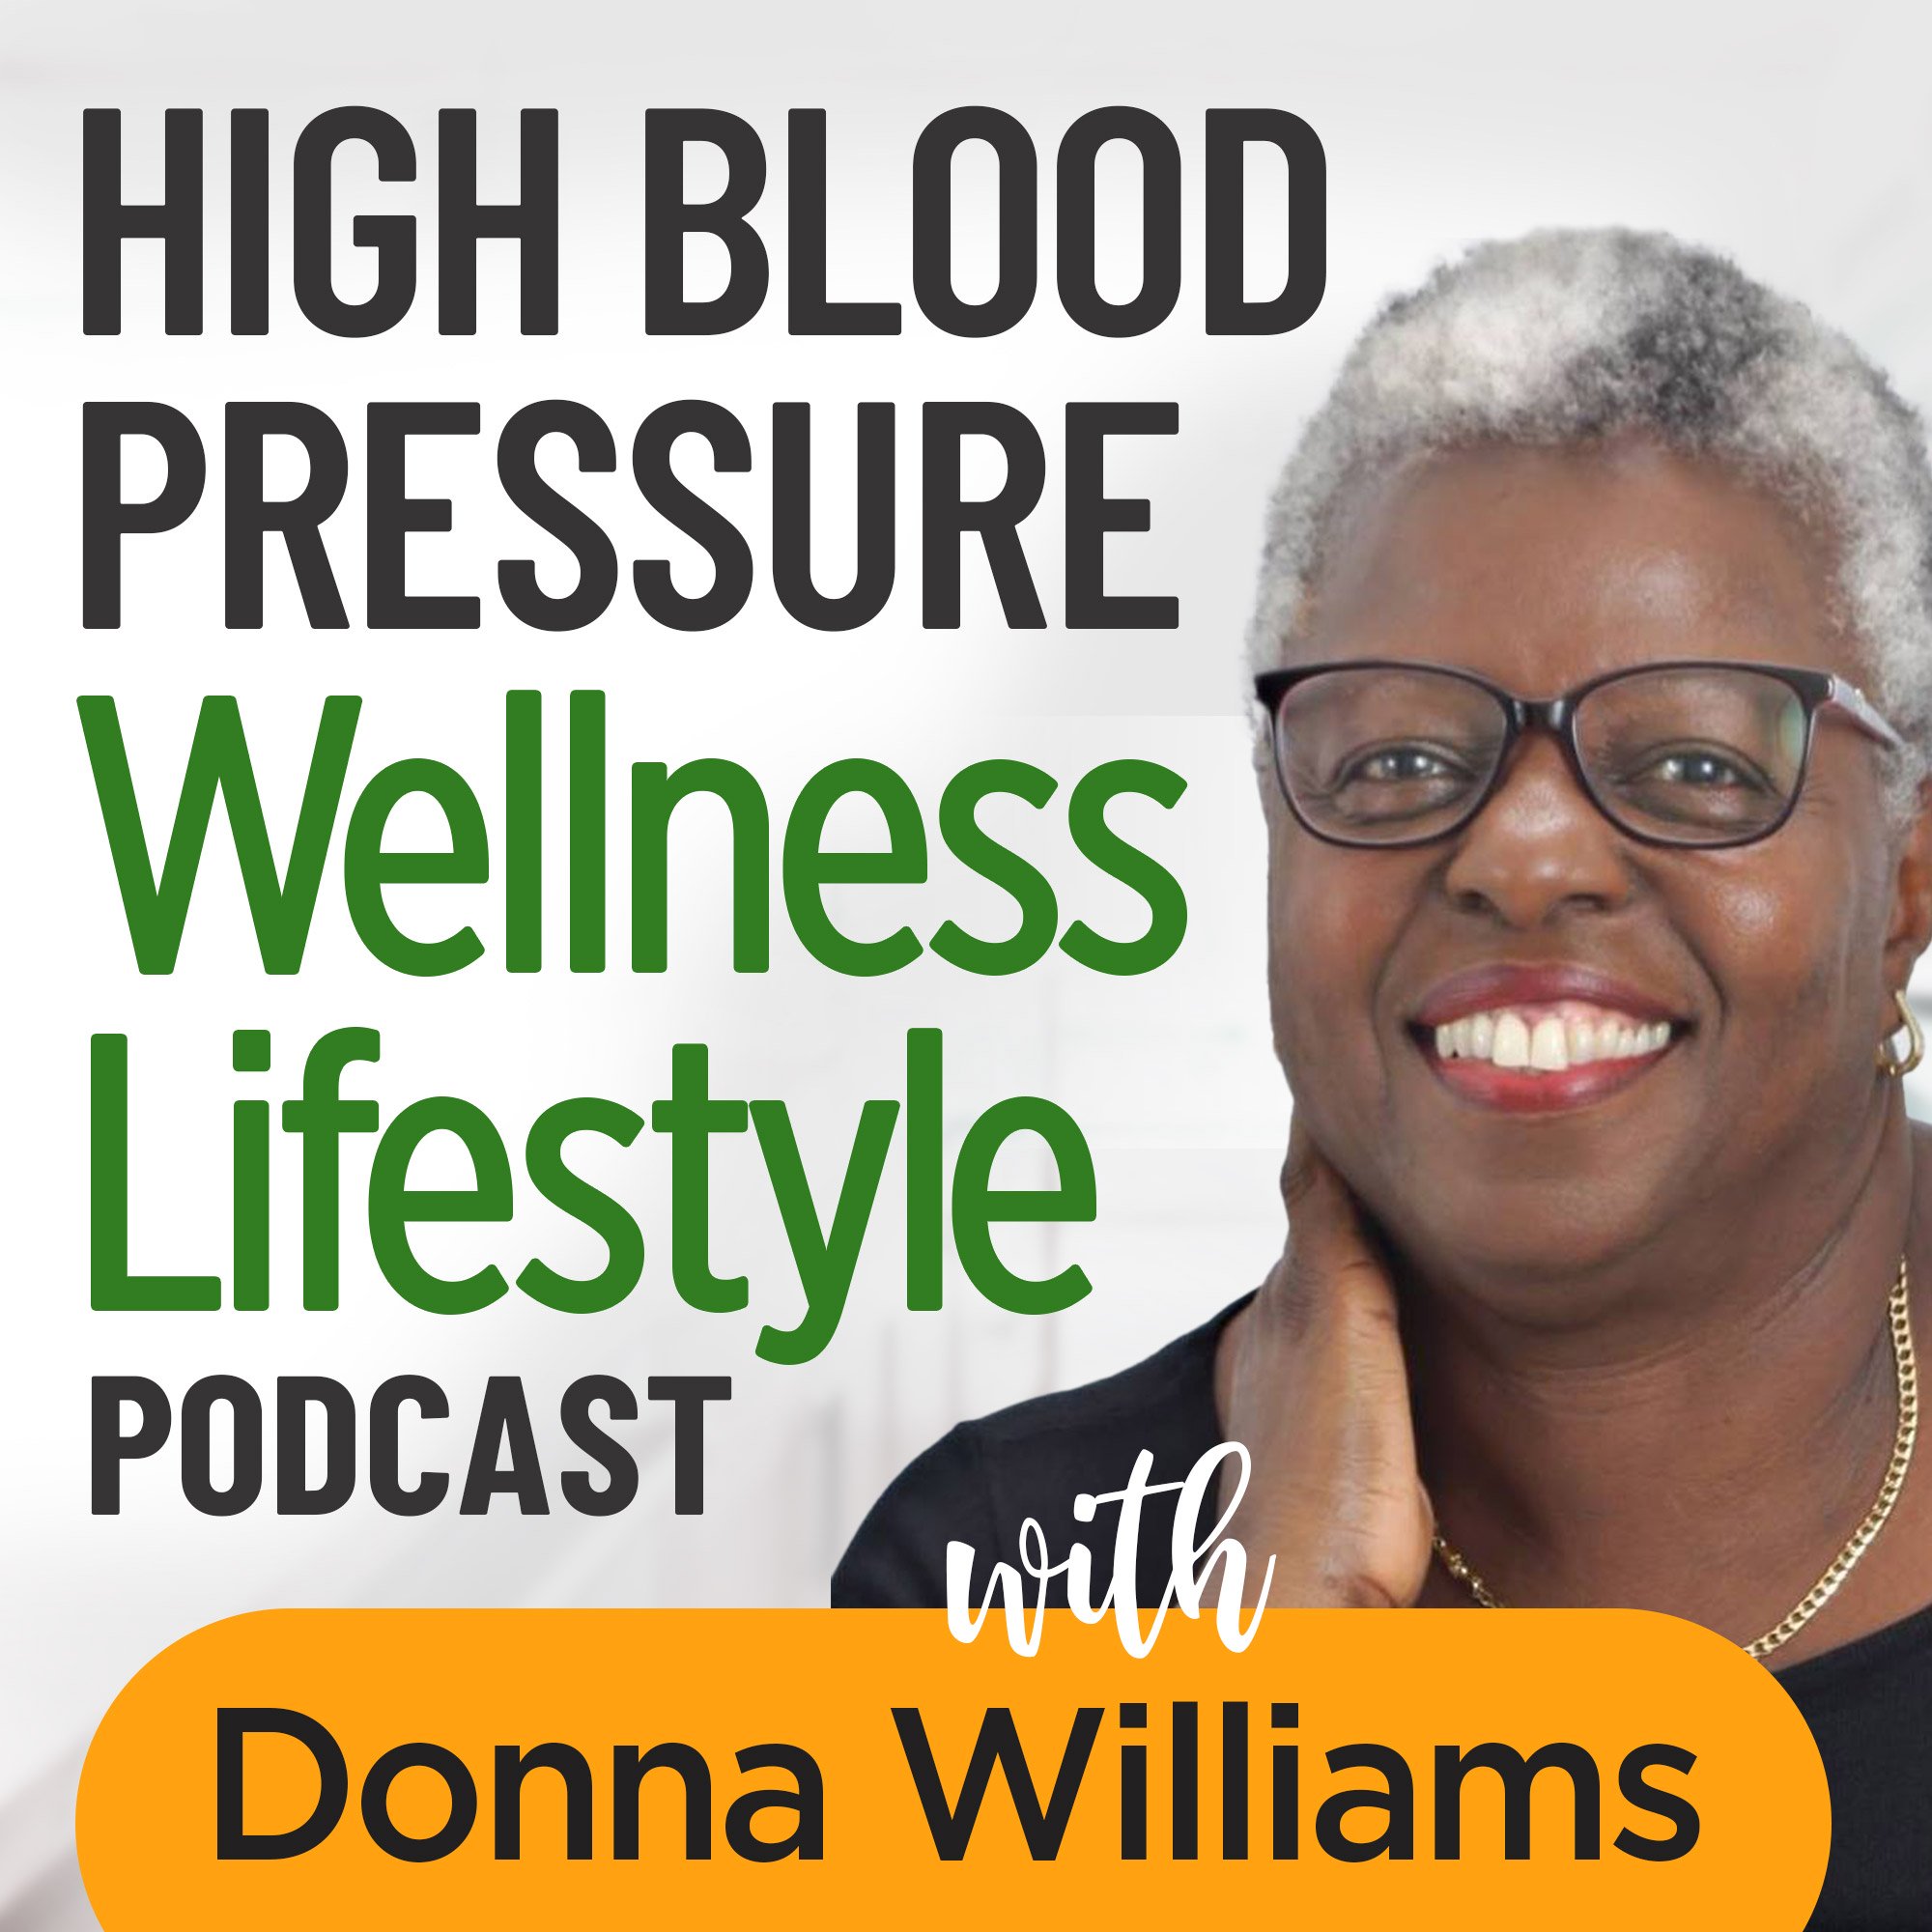 hbp podcast picture.  https://www.info-on-high-blood-pressure.com/mental-health-journey-with-dr-ashley-harvey.html